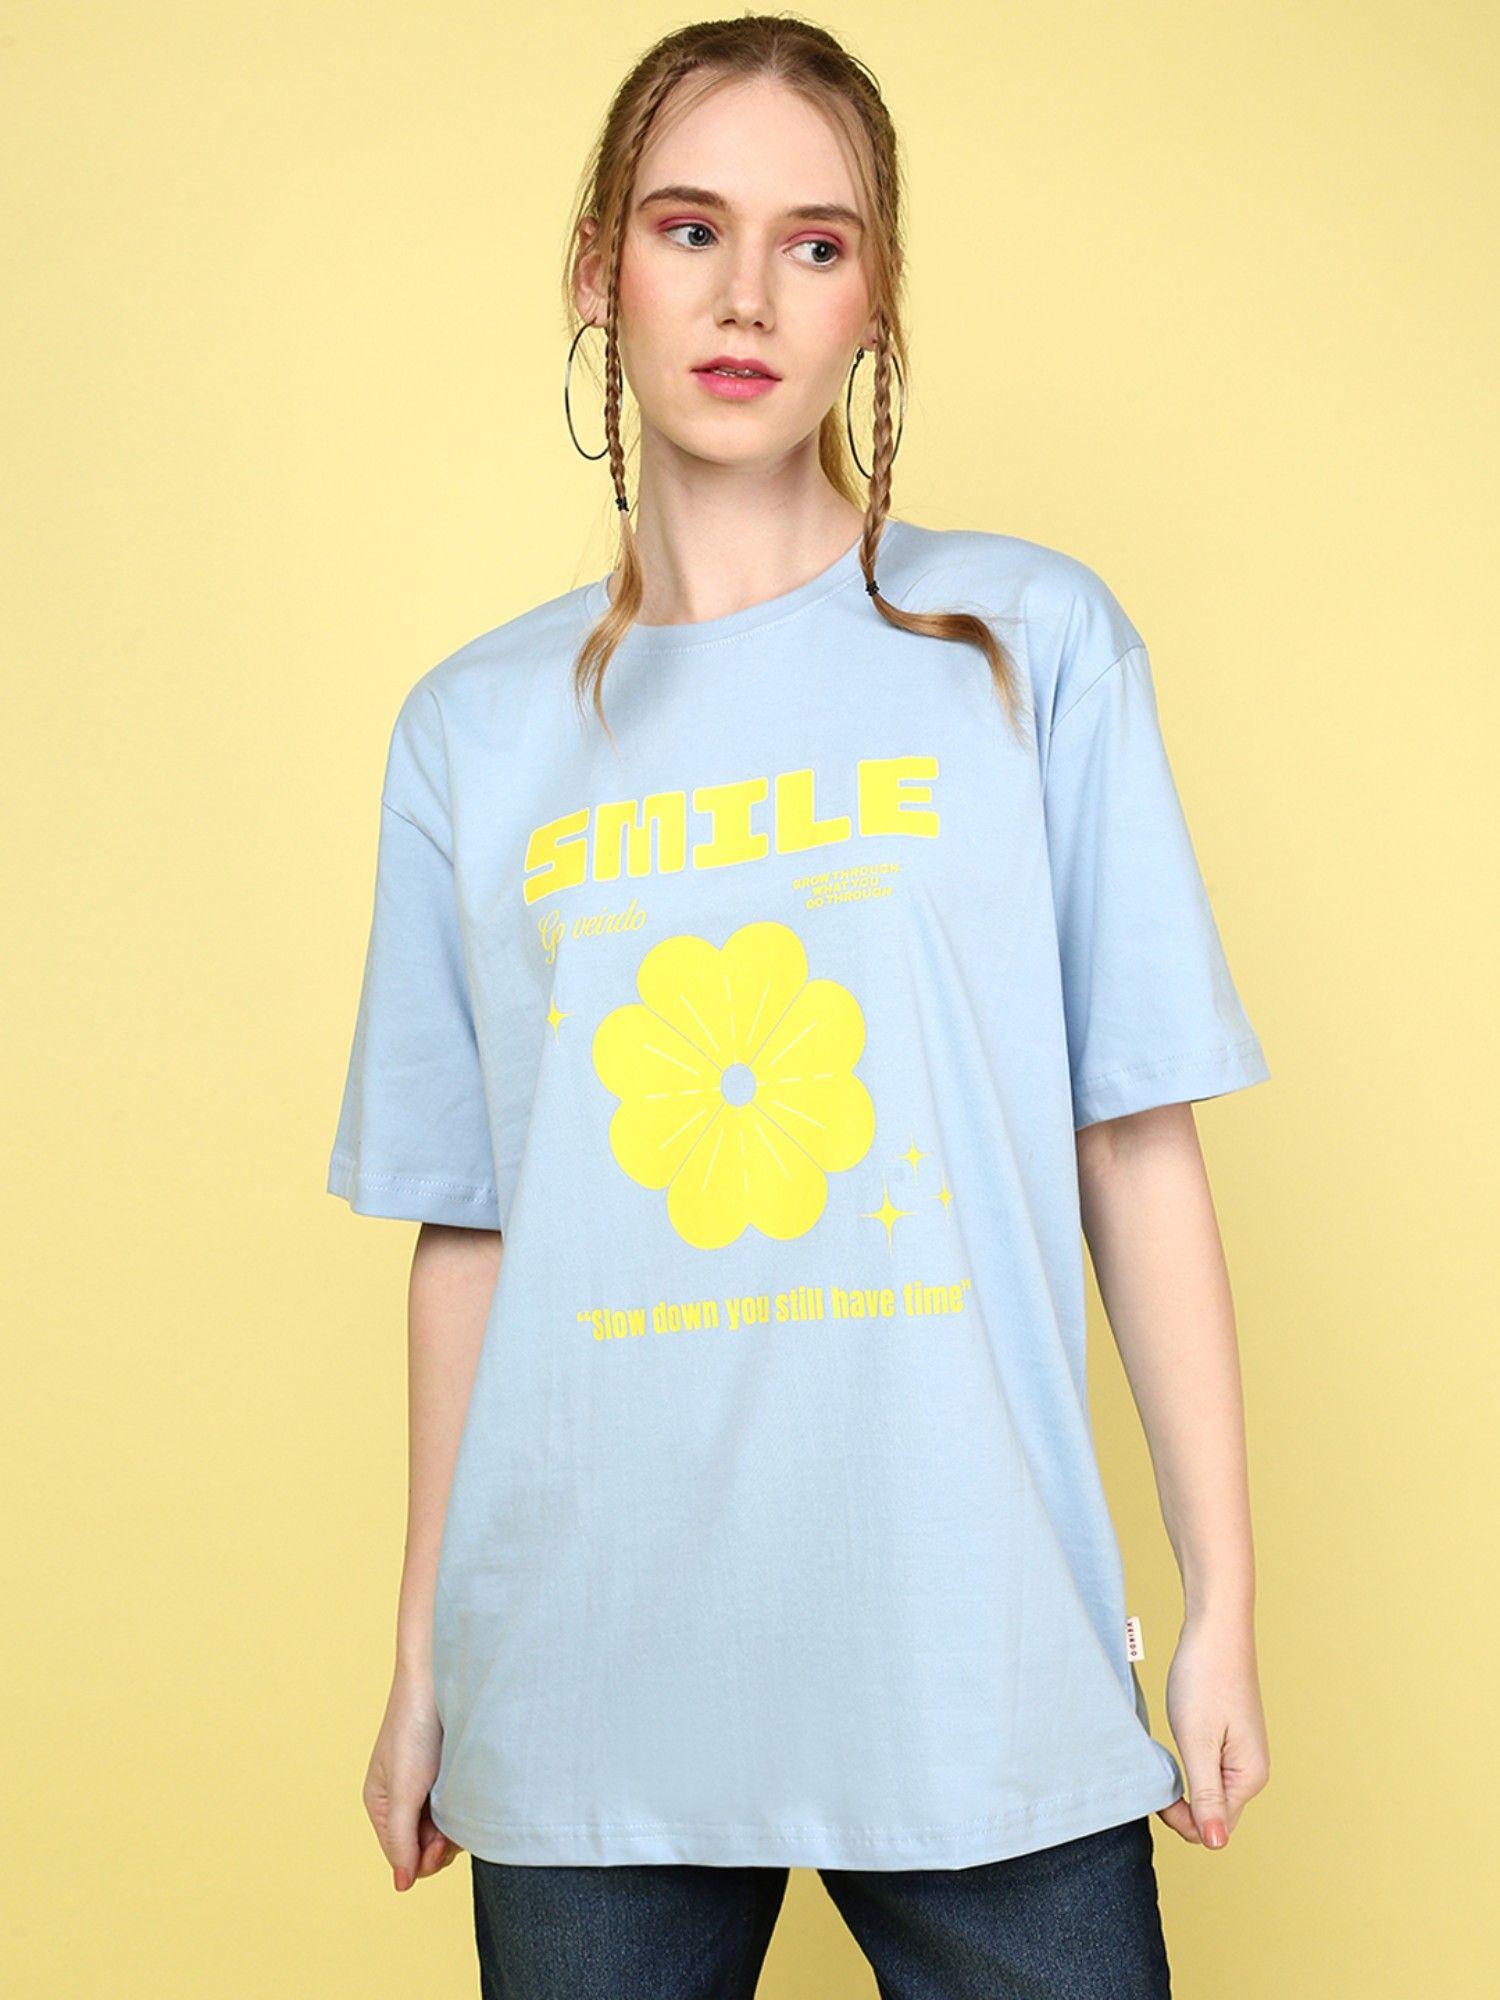 graphic printed light blue oversized t-shirt